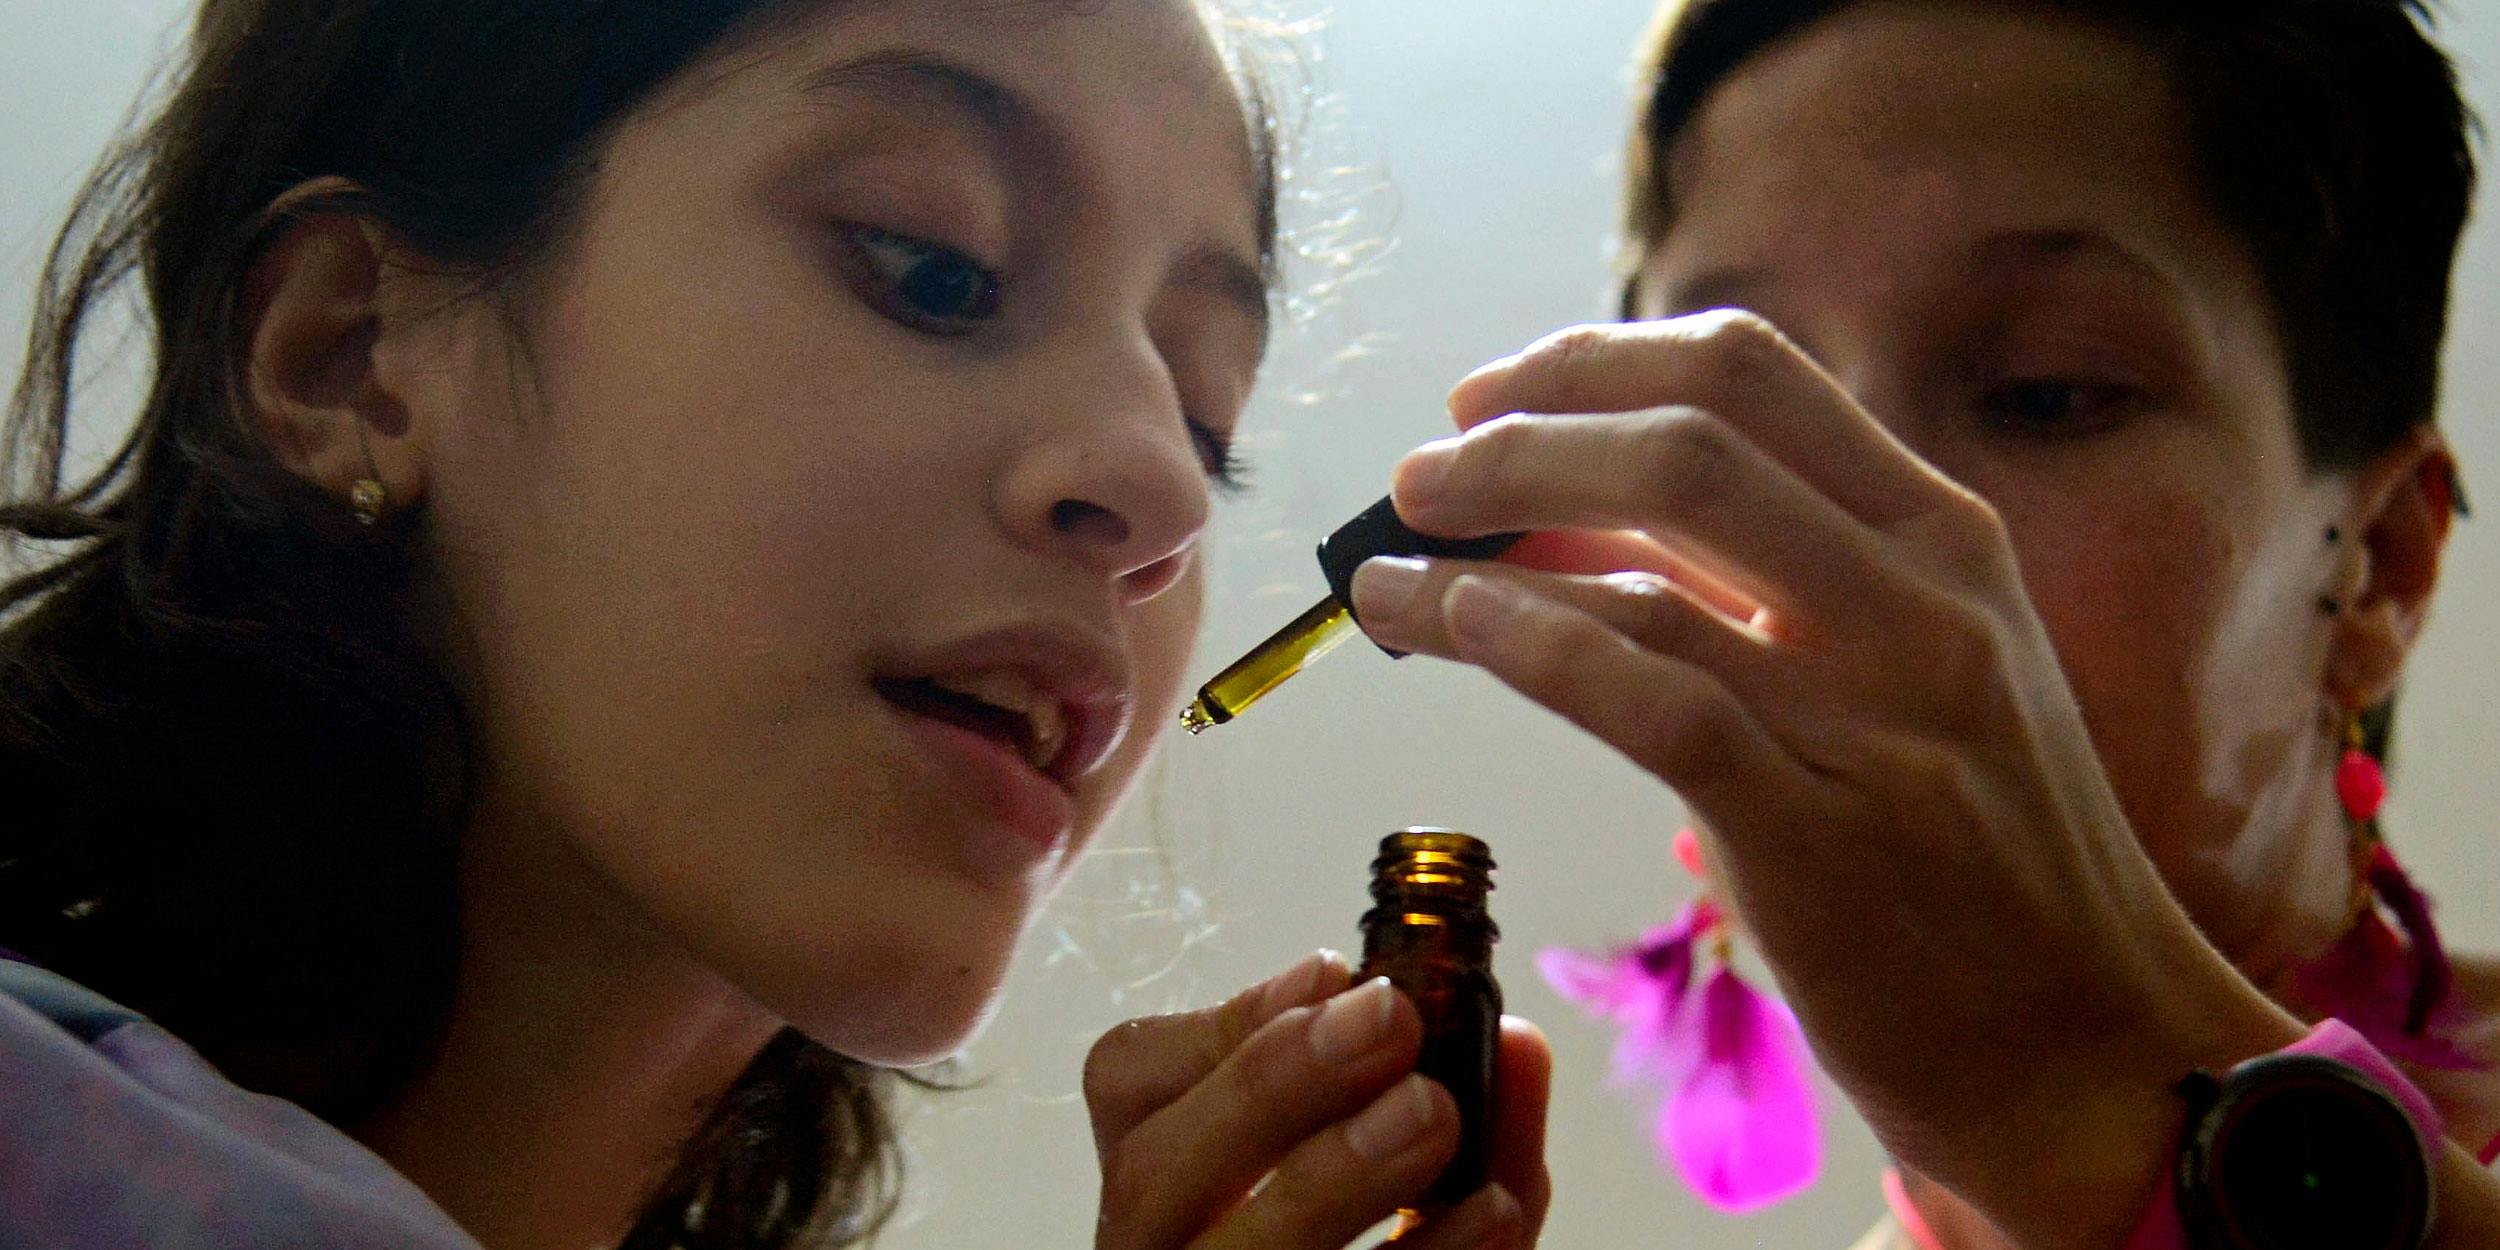 Colombian Ines Cano gives medical marijuana to her daughter Luna Valentina (L) at their home in Medellin, Antioquia department, Colombia on November 25, 2015. Valentina, 12, who was born with refractory epilepsy, started to use medical marijuana as an alternative medicine, which is the only solution which calms her seizures. Medical marijuana, or CBD more specifically, has shown promise in children with epilepsy.